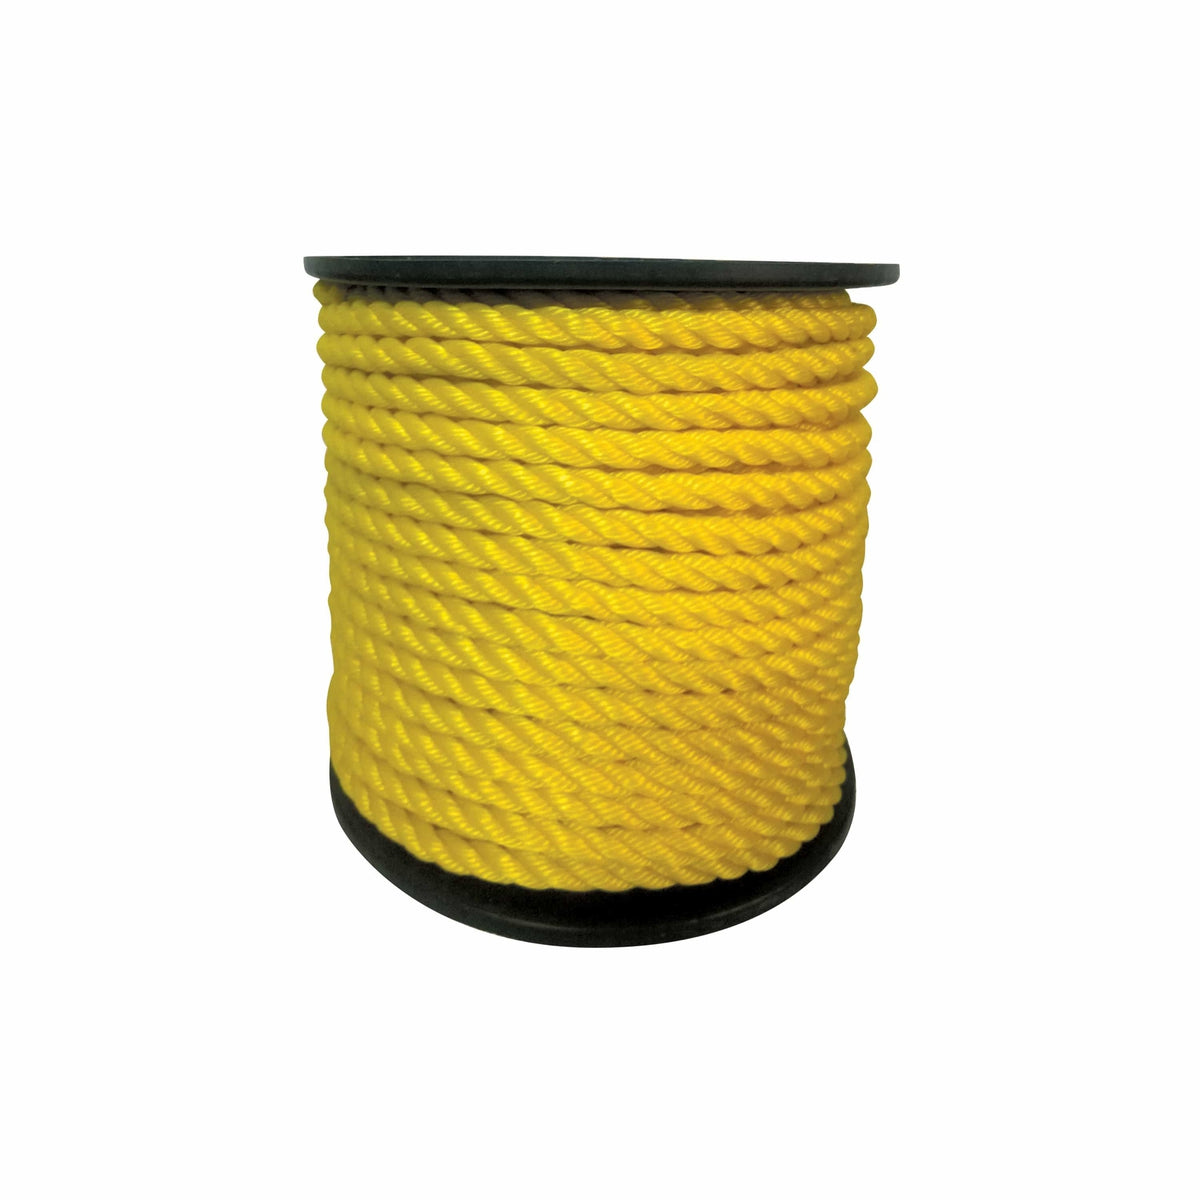 Extreme Max Twisted Polypropylene 3/8" 600' Yellow #3006.2240